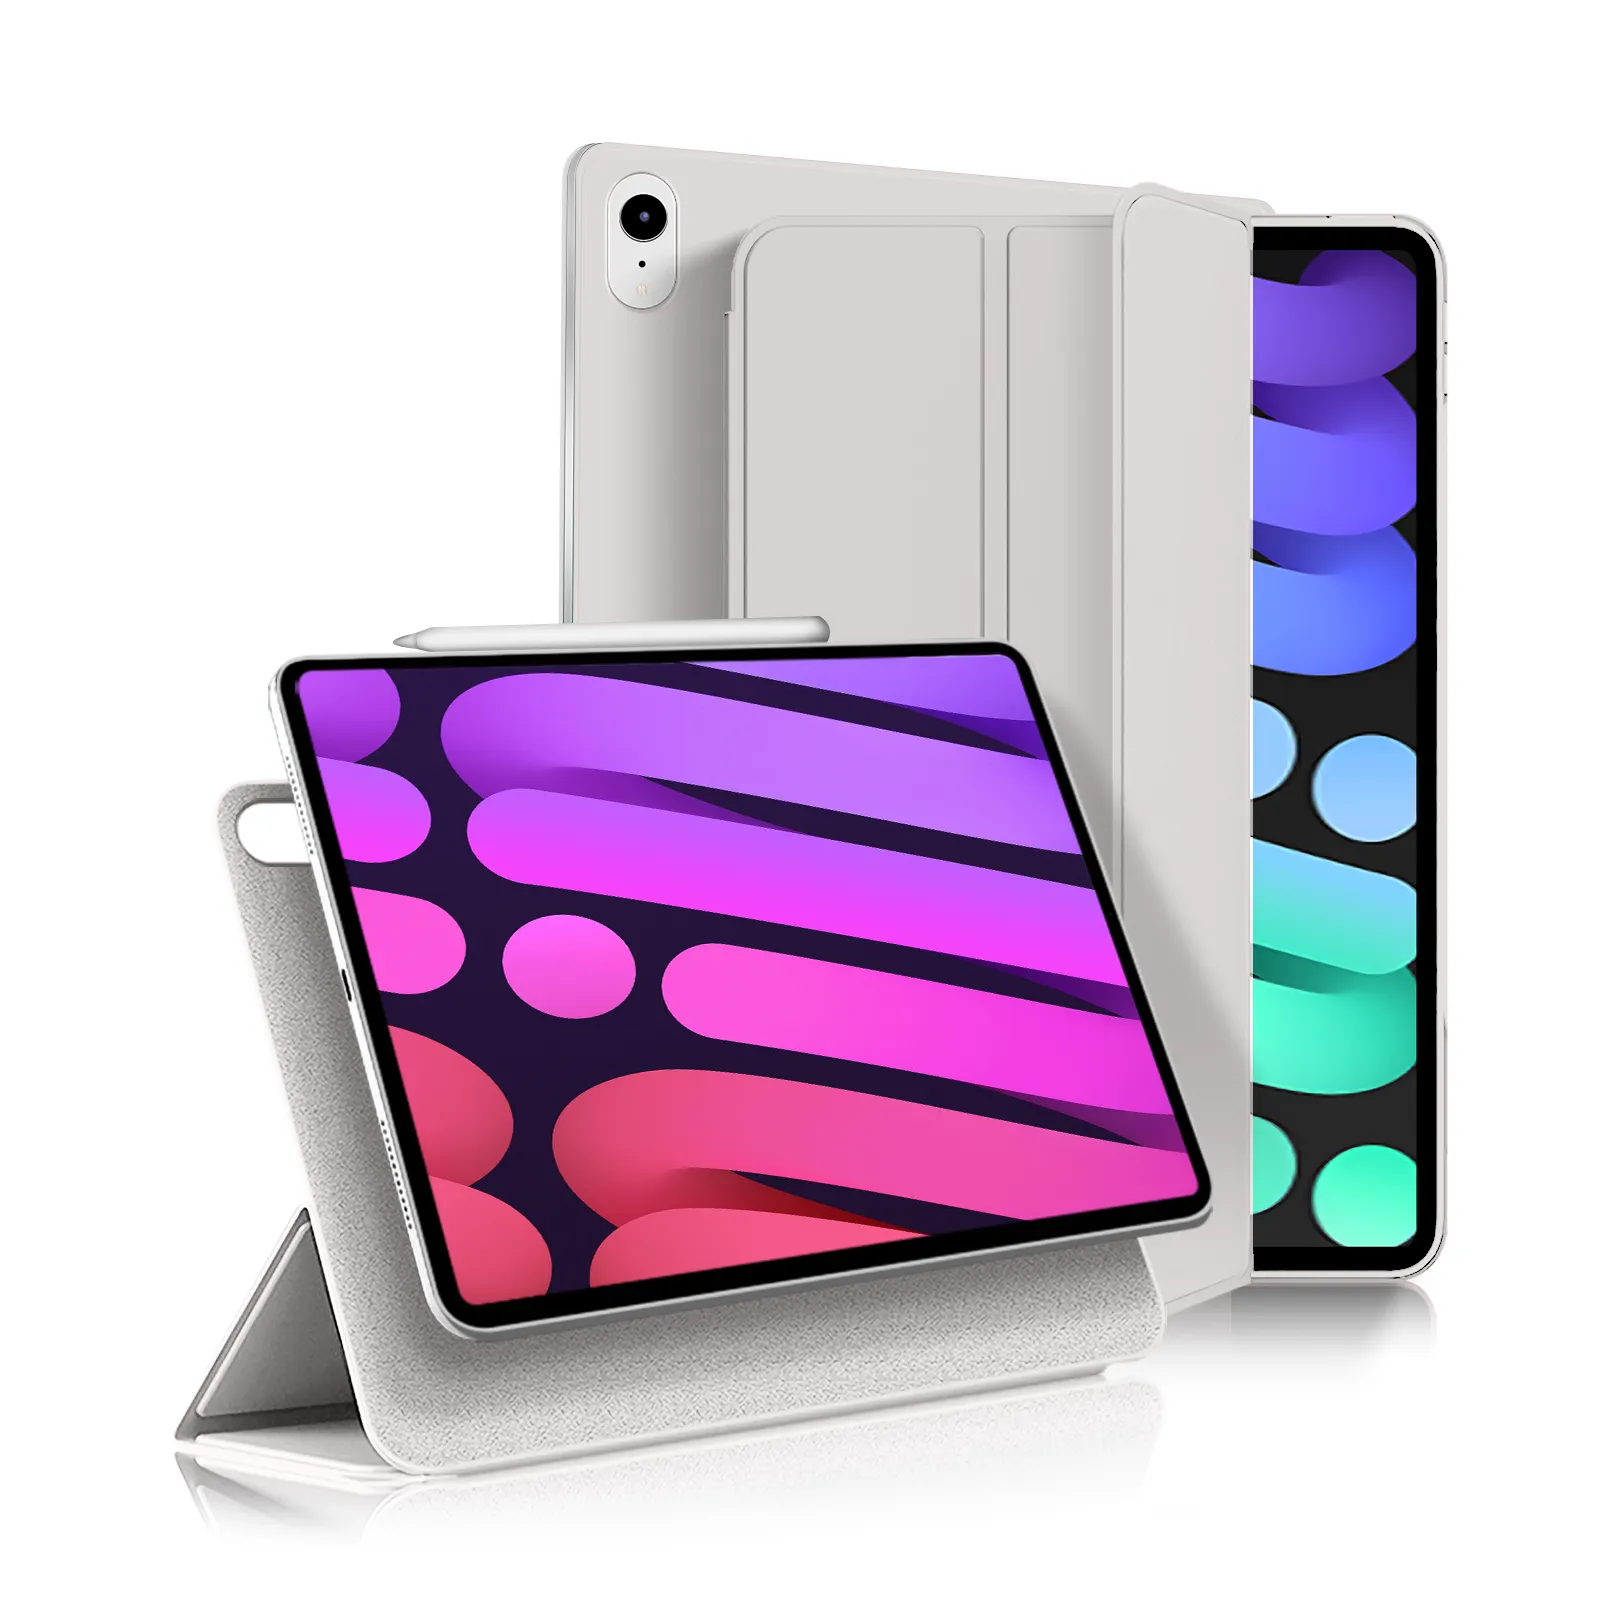 Smart Tablet Cover Magnetic Case For IPad Mini 6 8.3 Inch Lightweight Cover For IPad Mini 6 2021 Accept Customize